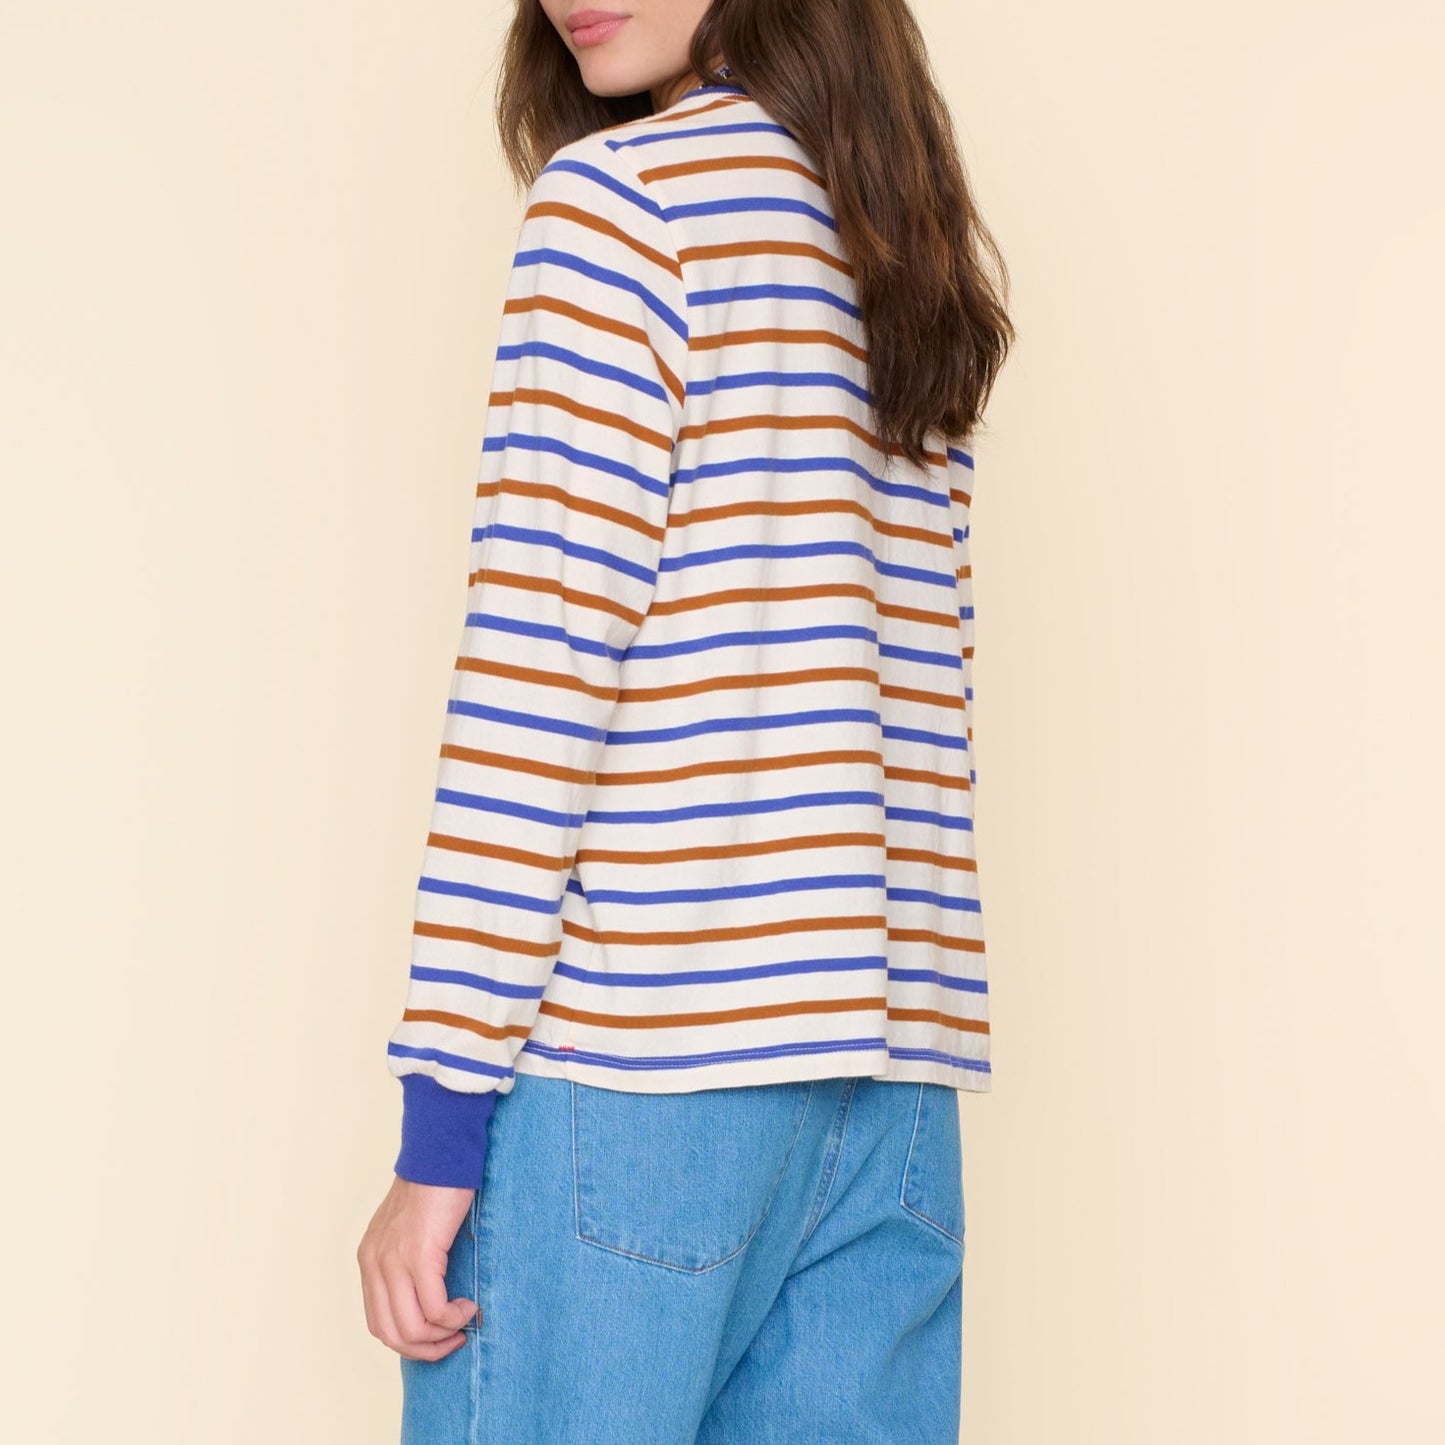 Easton Striped Tee in Royal Spice